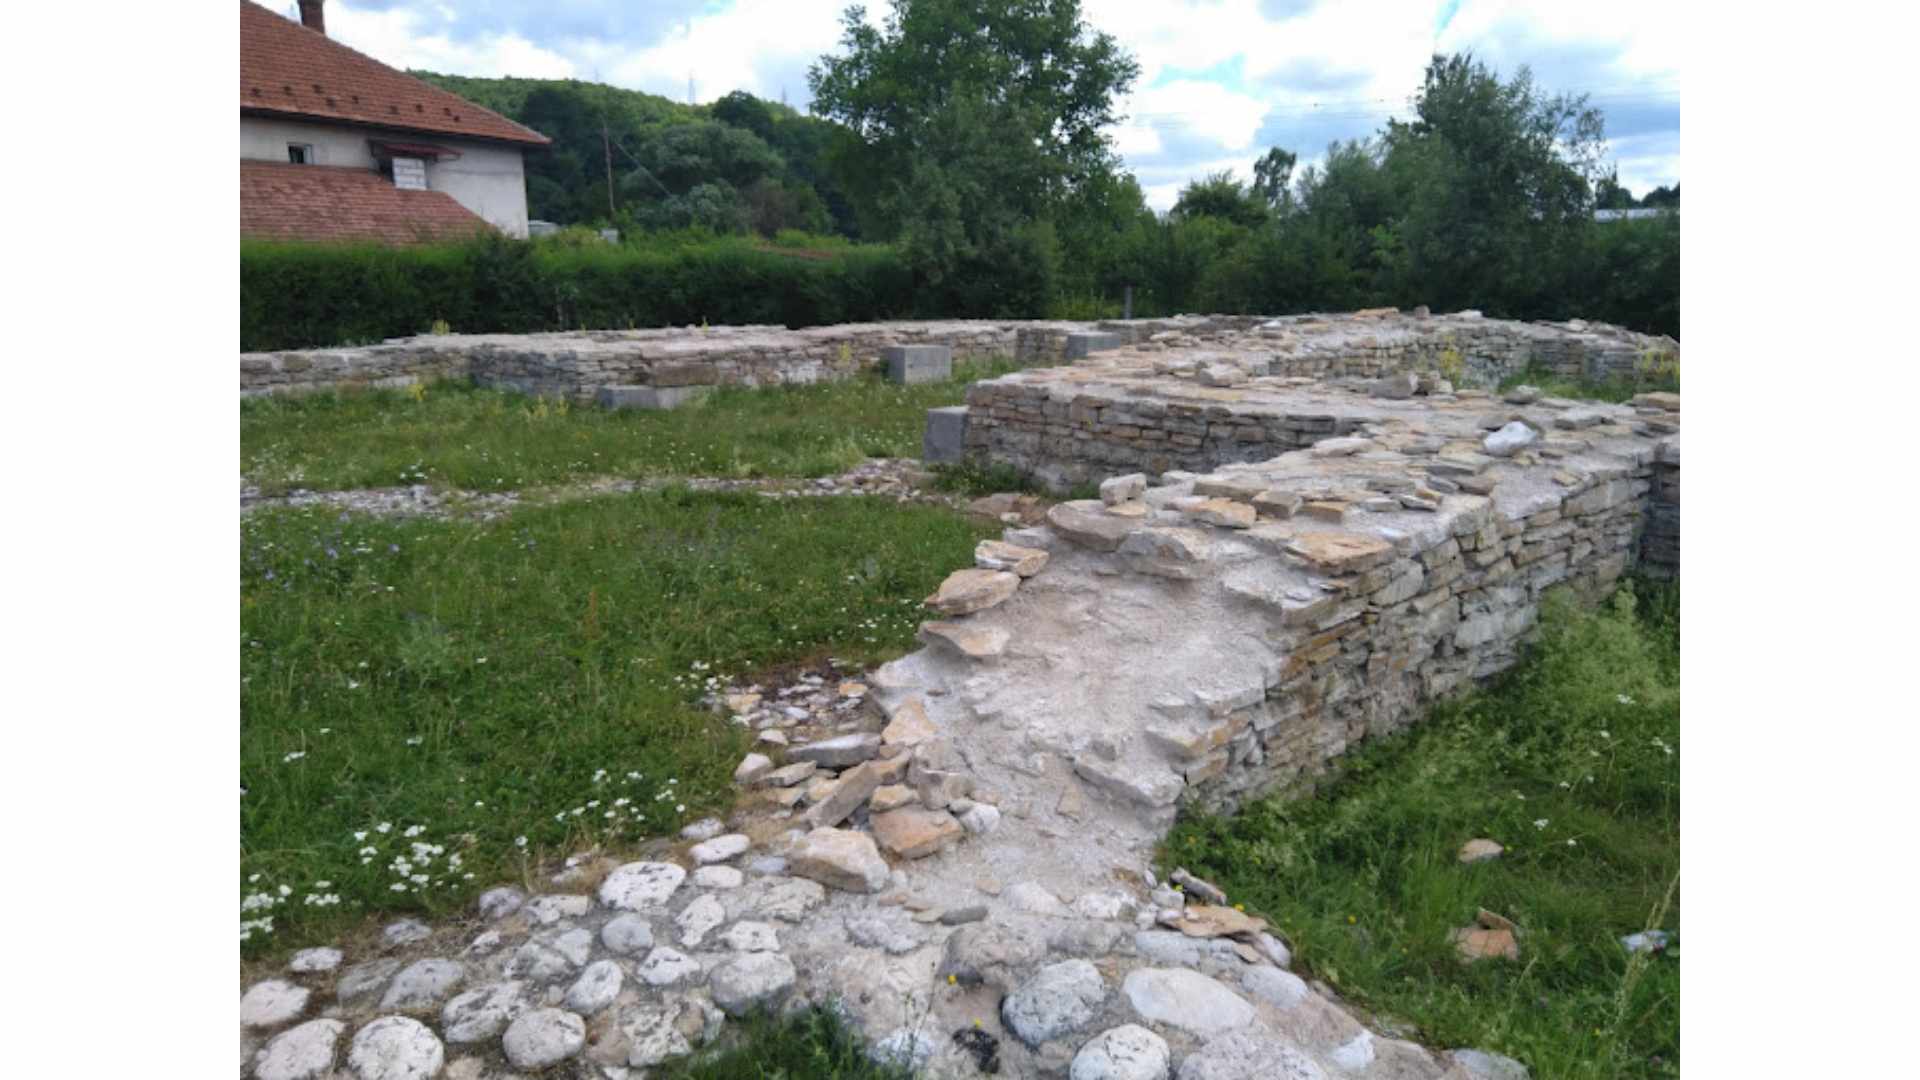 Archaeological site Mile